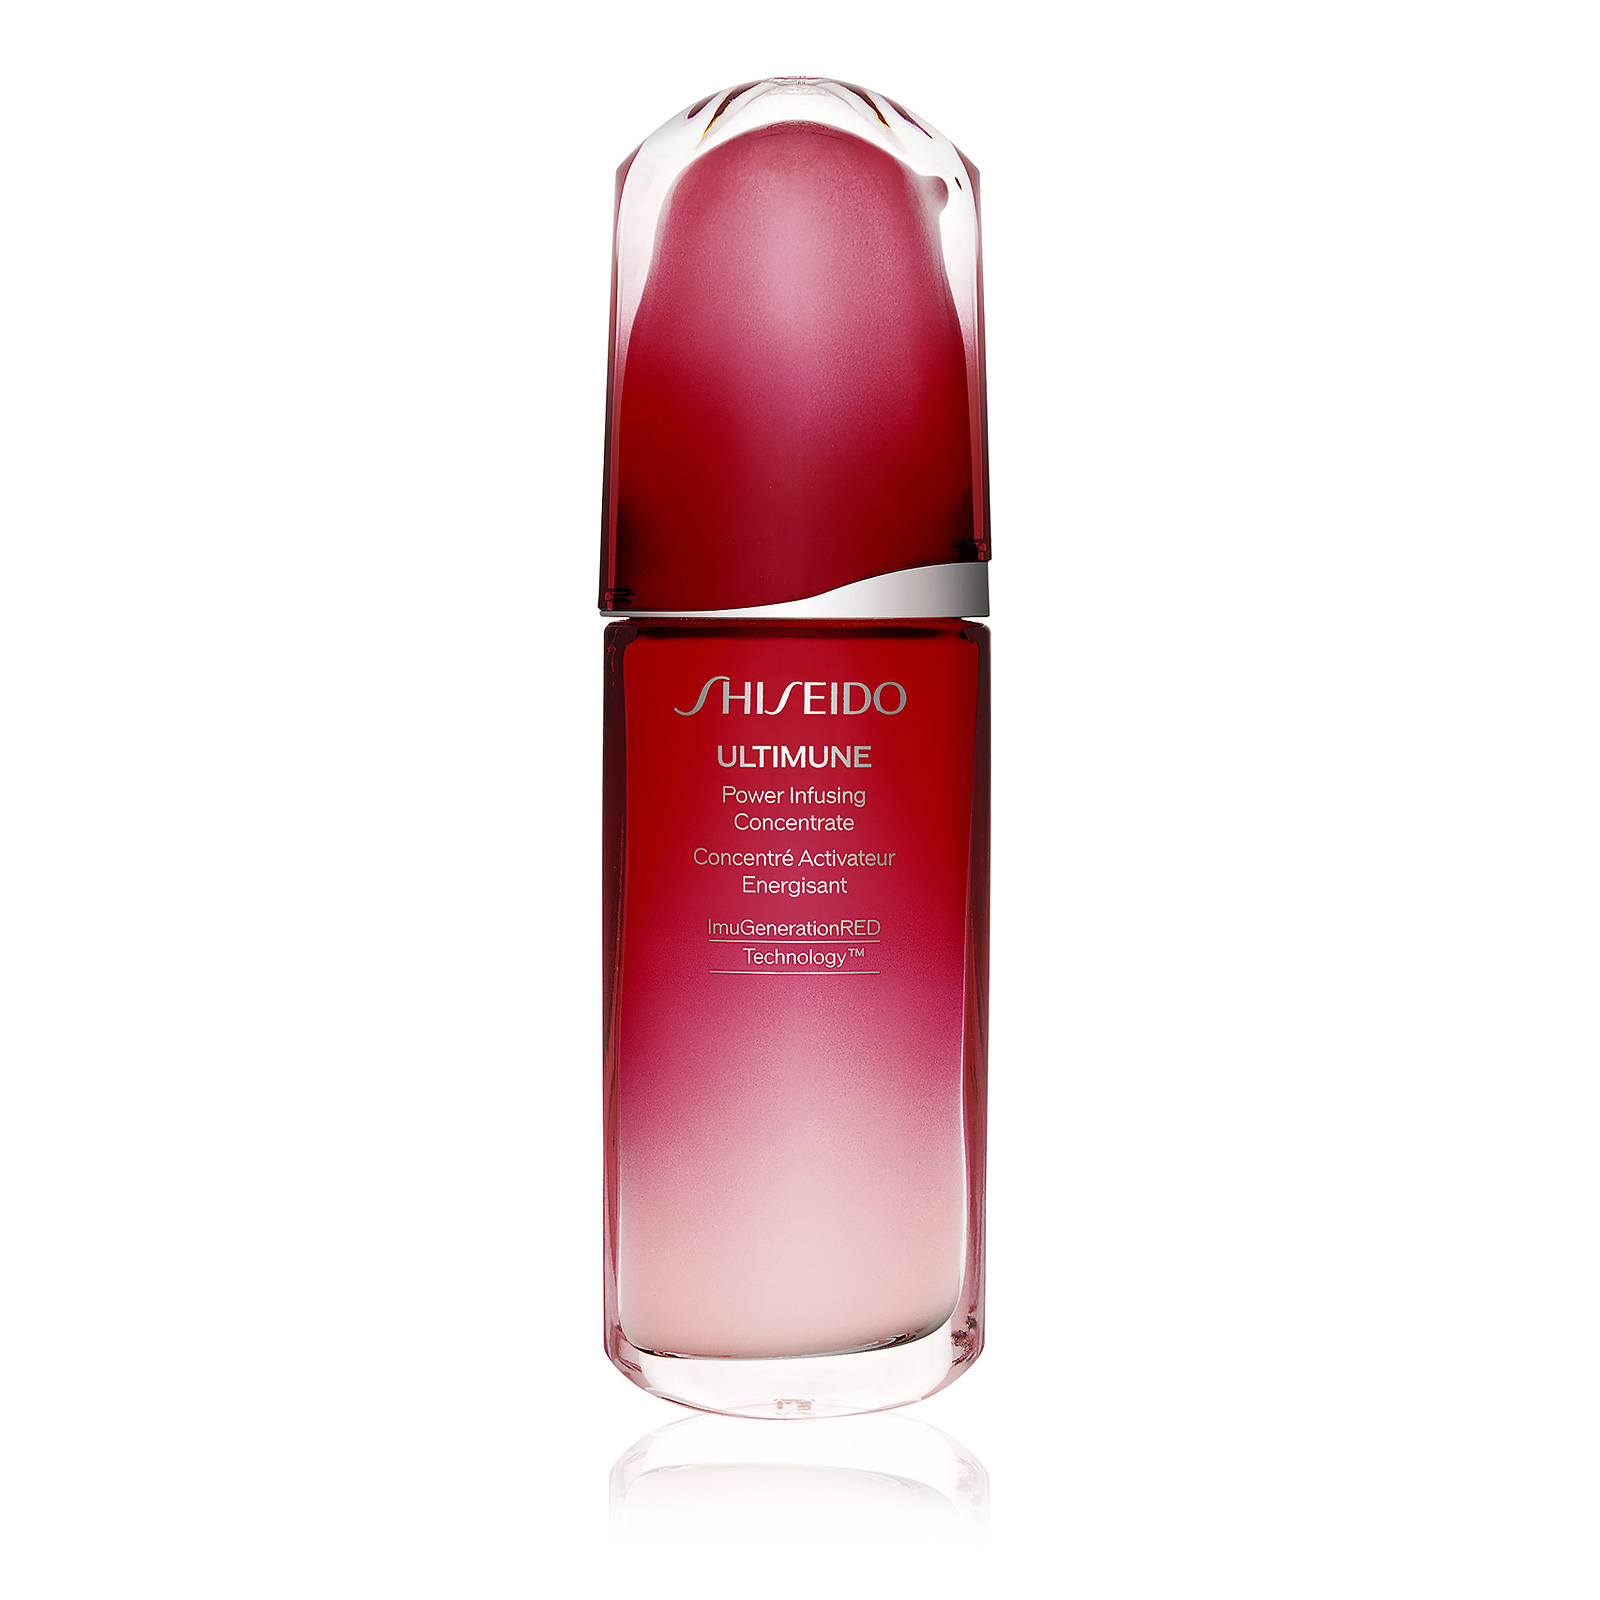 Shiseido Ultimune Power Infusing Concentrate III2.5 oz 75 ml AKB Beauty